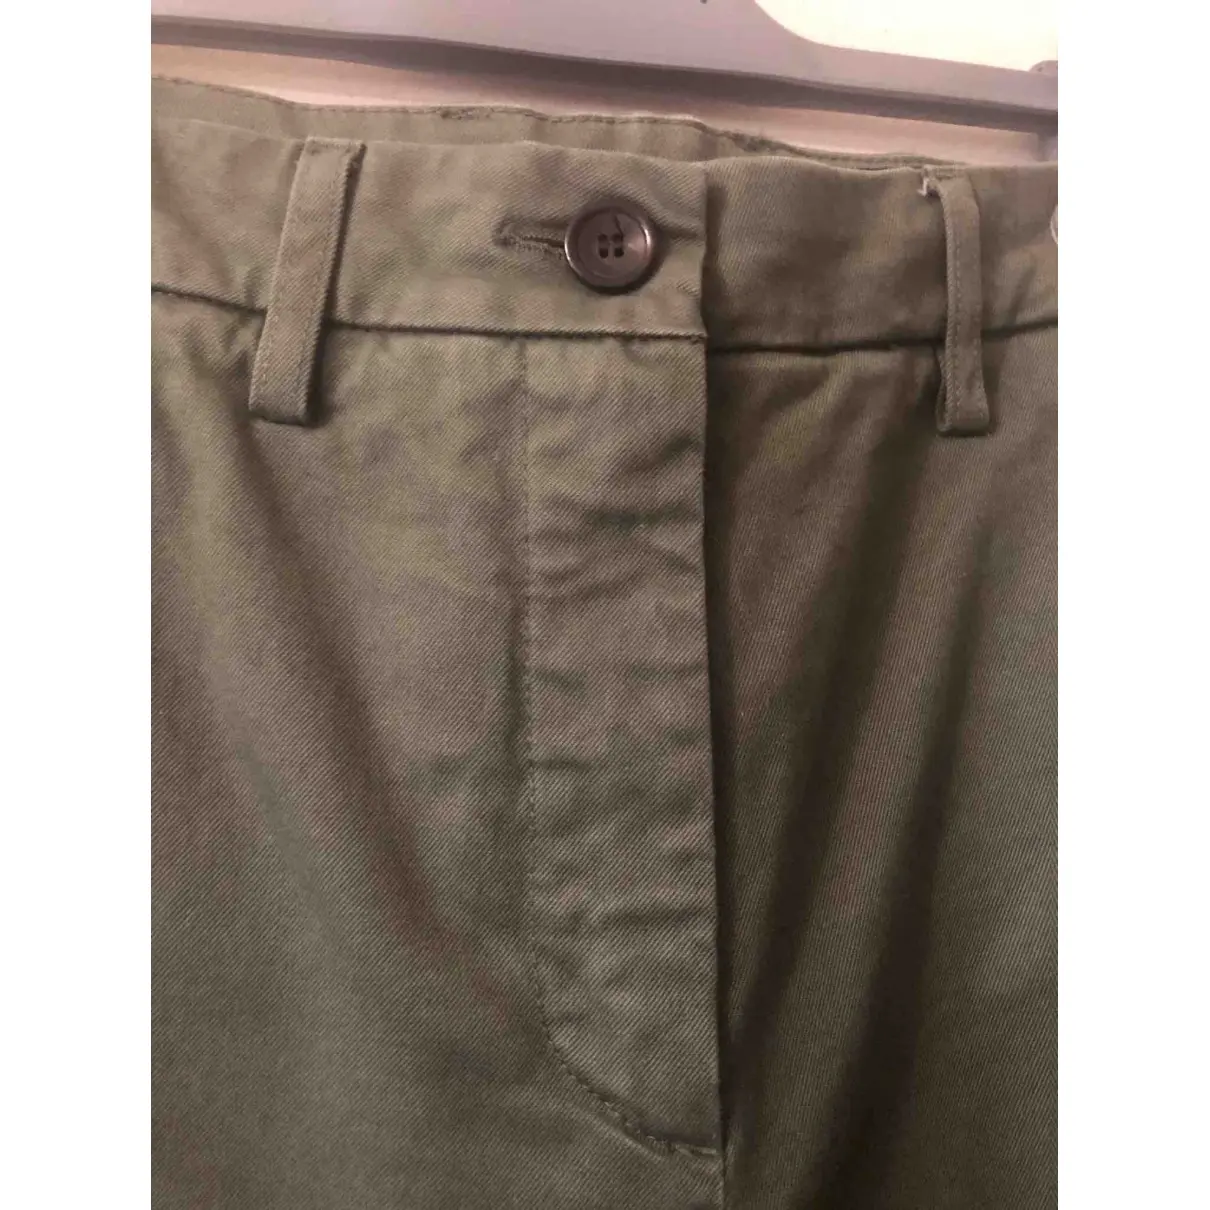 Department 5 Carot pants for sale